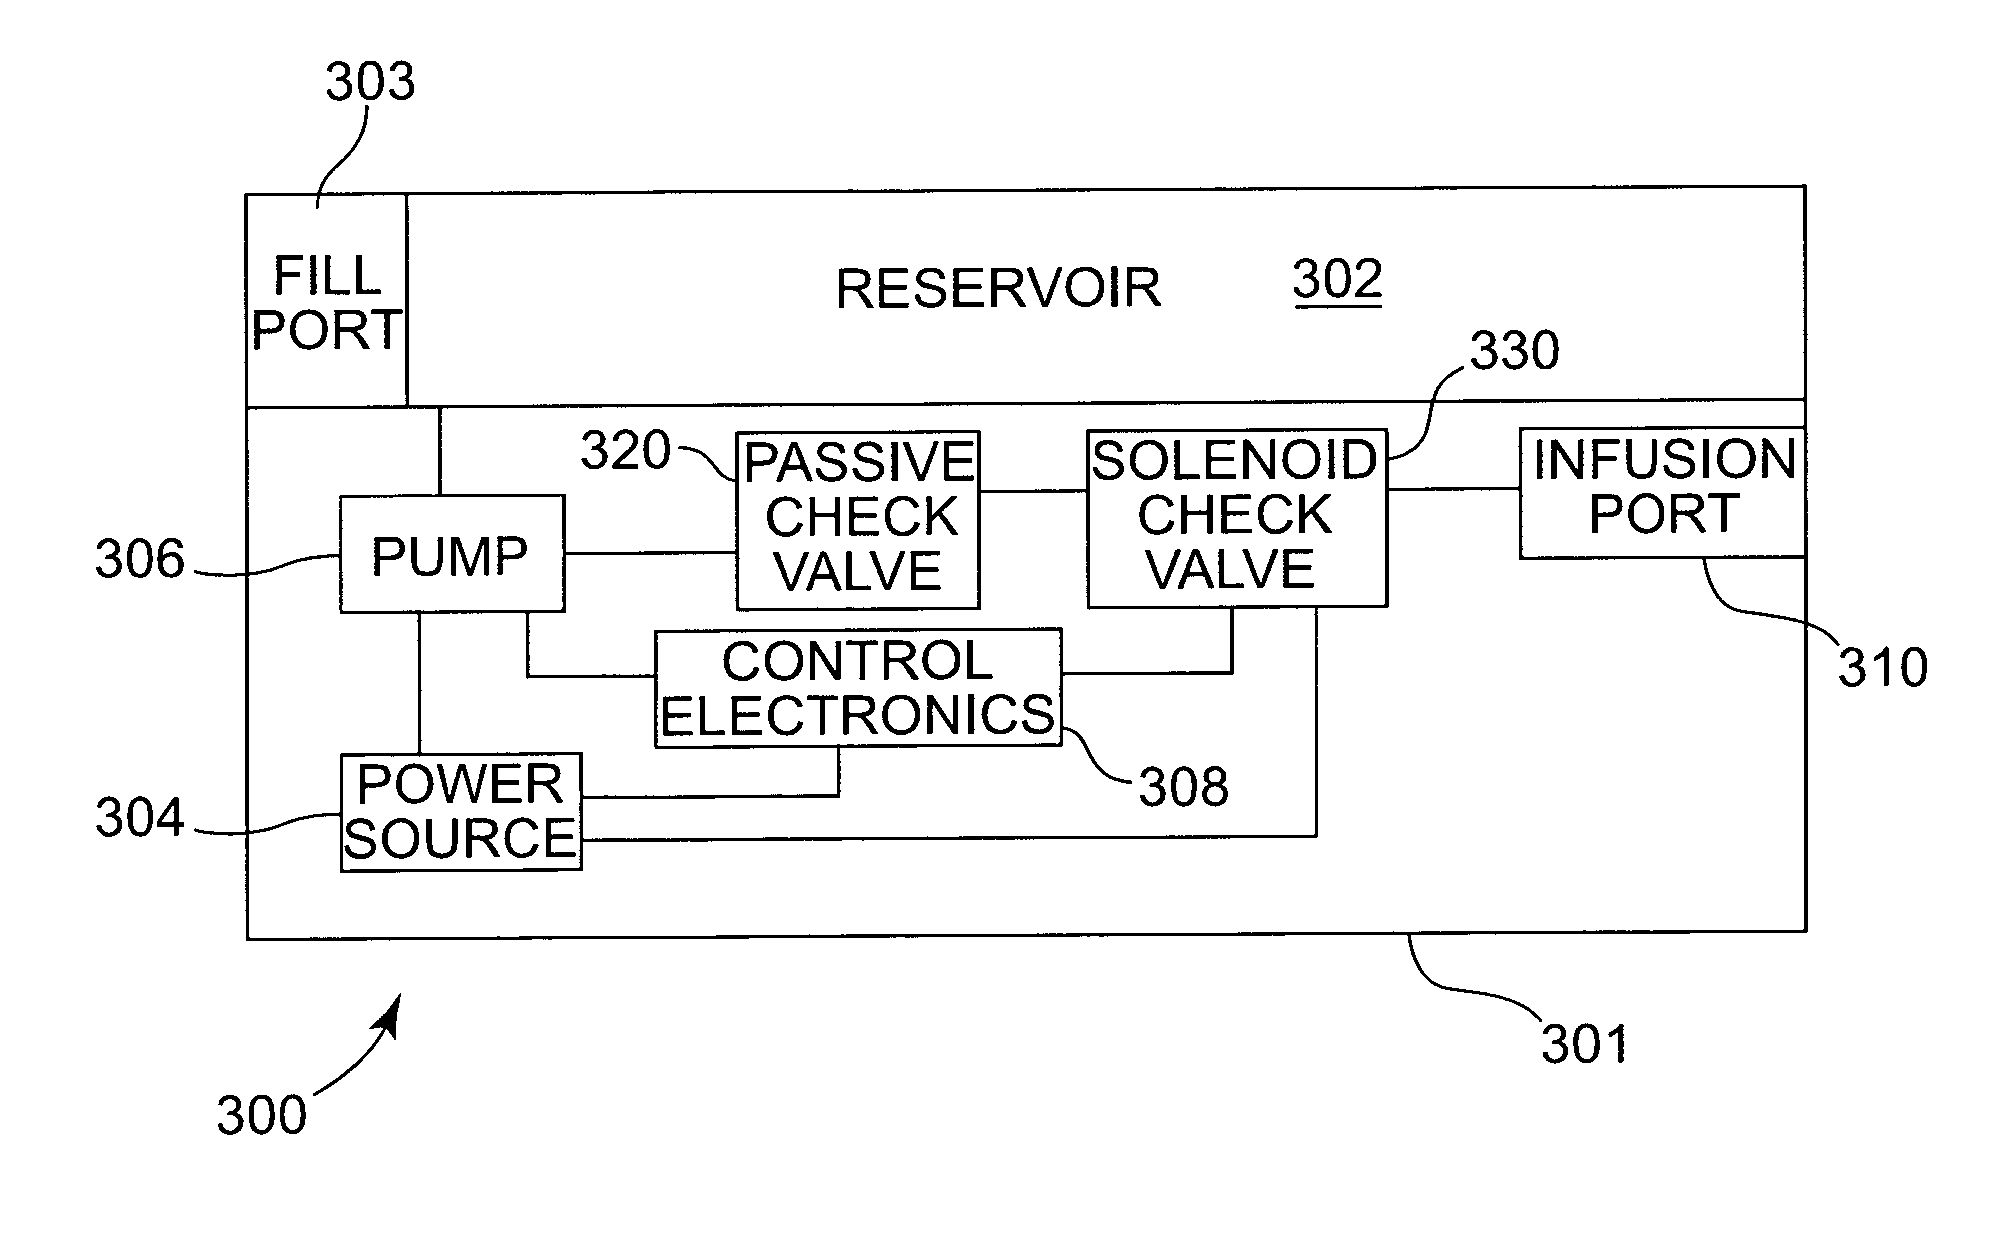 Infusion device with active and passive check valves